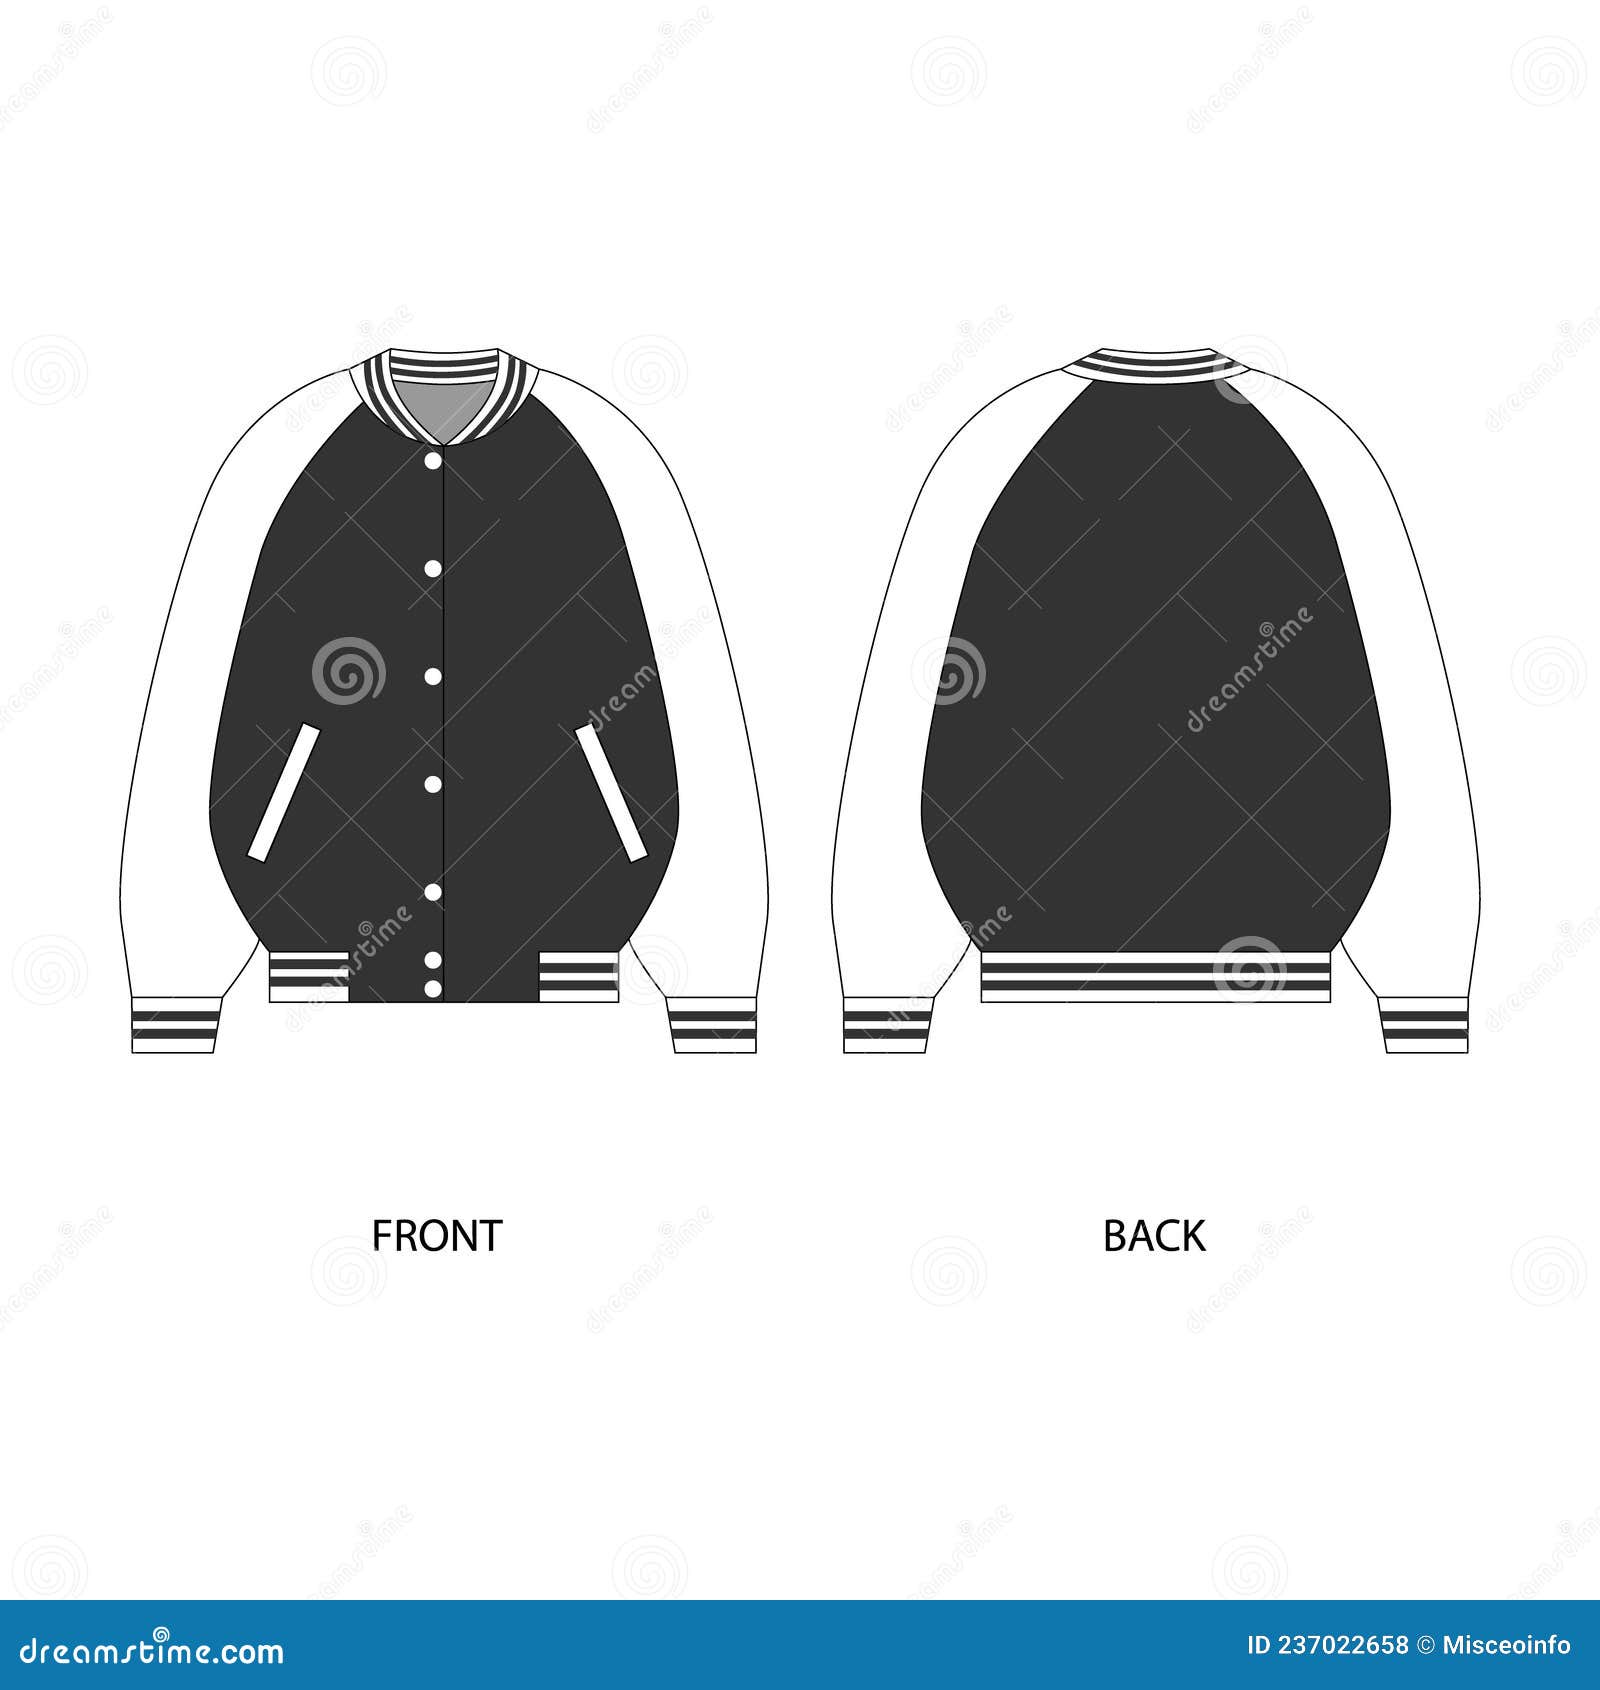 Bomber Jacket Vector Design Template. Jacket Technical Drawing Stock ...